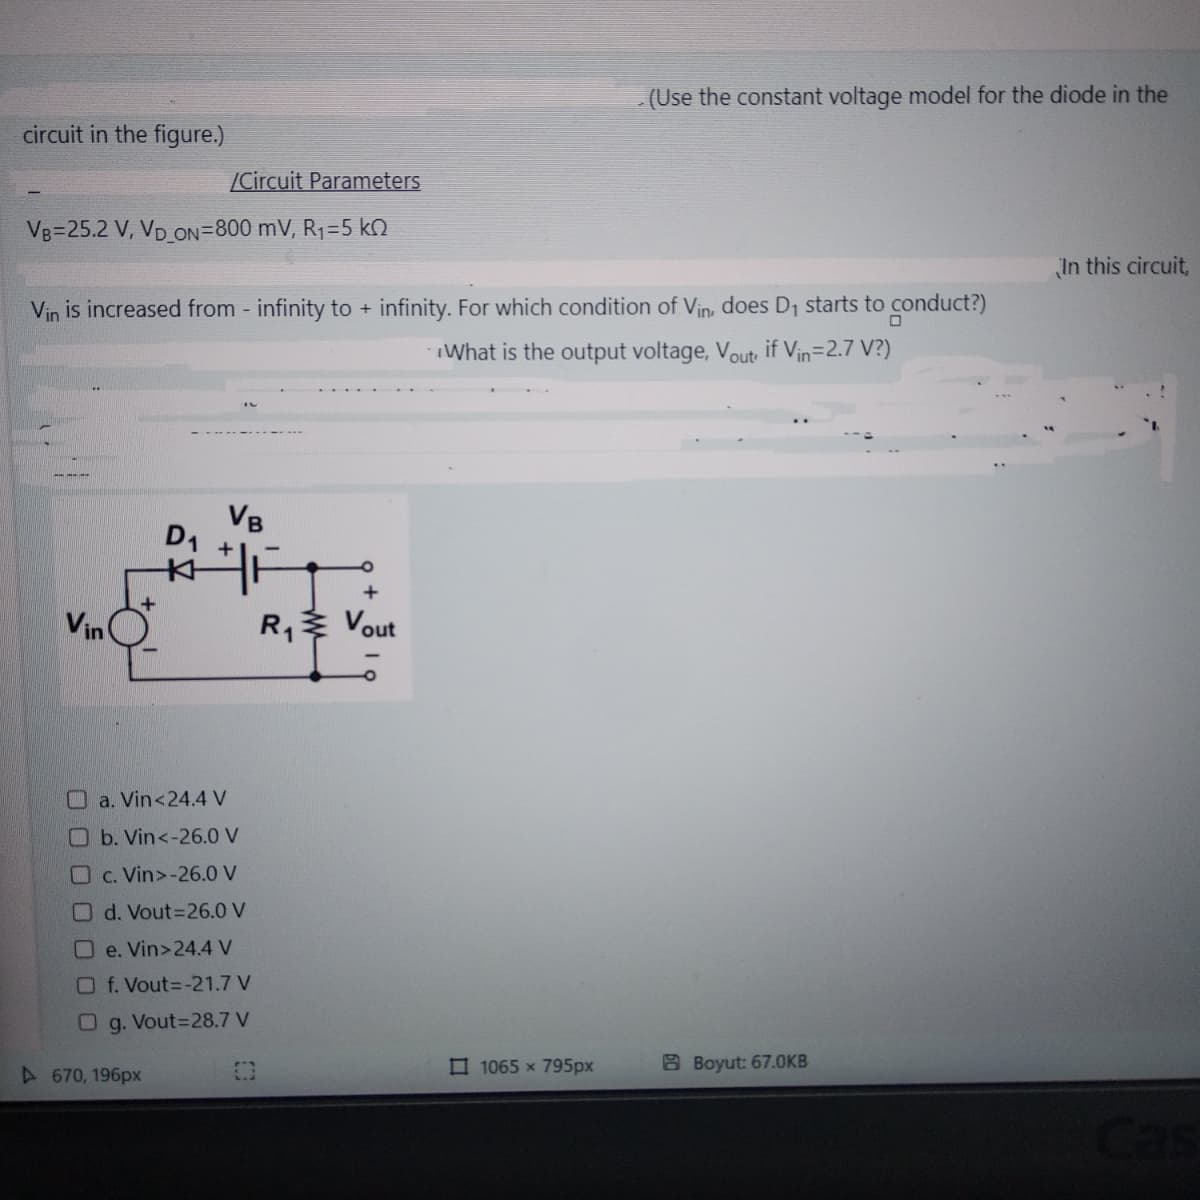 circuit in the figure.)
VB=25.2 V, VD_ON=800 mV, R₁=5 k
/Circuit Parameters
Vin
Vin is increased from - infinity to + infinity. For which condition of Vin, does D₁ starts to conduct?)
What is the output voltage, Vout, if Vin=2.7 V?)
A670, 196px
VB
D₁
WHET
a. Vin<24.4 V
b. Vin<-26.0 V
c. Vin>-26.0 V
Od. Vout=26.0 V
Oe. Vin>24.4 V
Of. Vout=-21.7 V
Og. Vout=28.7 V
O
+
R₁ Vout
(Use the constant voltage model for the diode in the
1065 x 795px
BBoyut: 67.0KB
In this circuit,